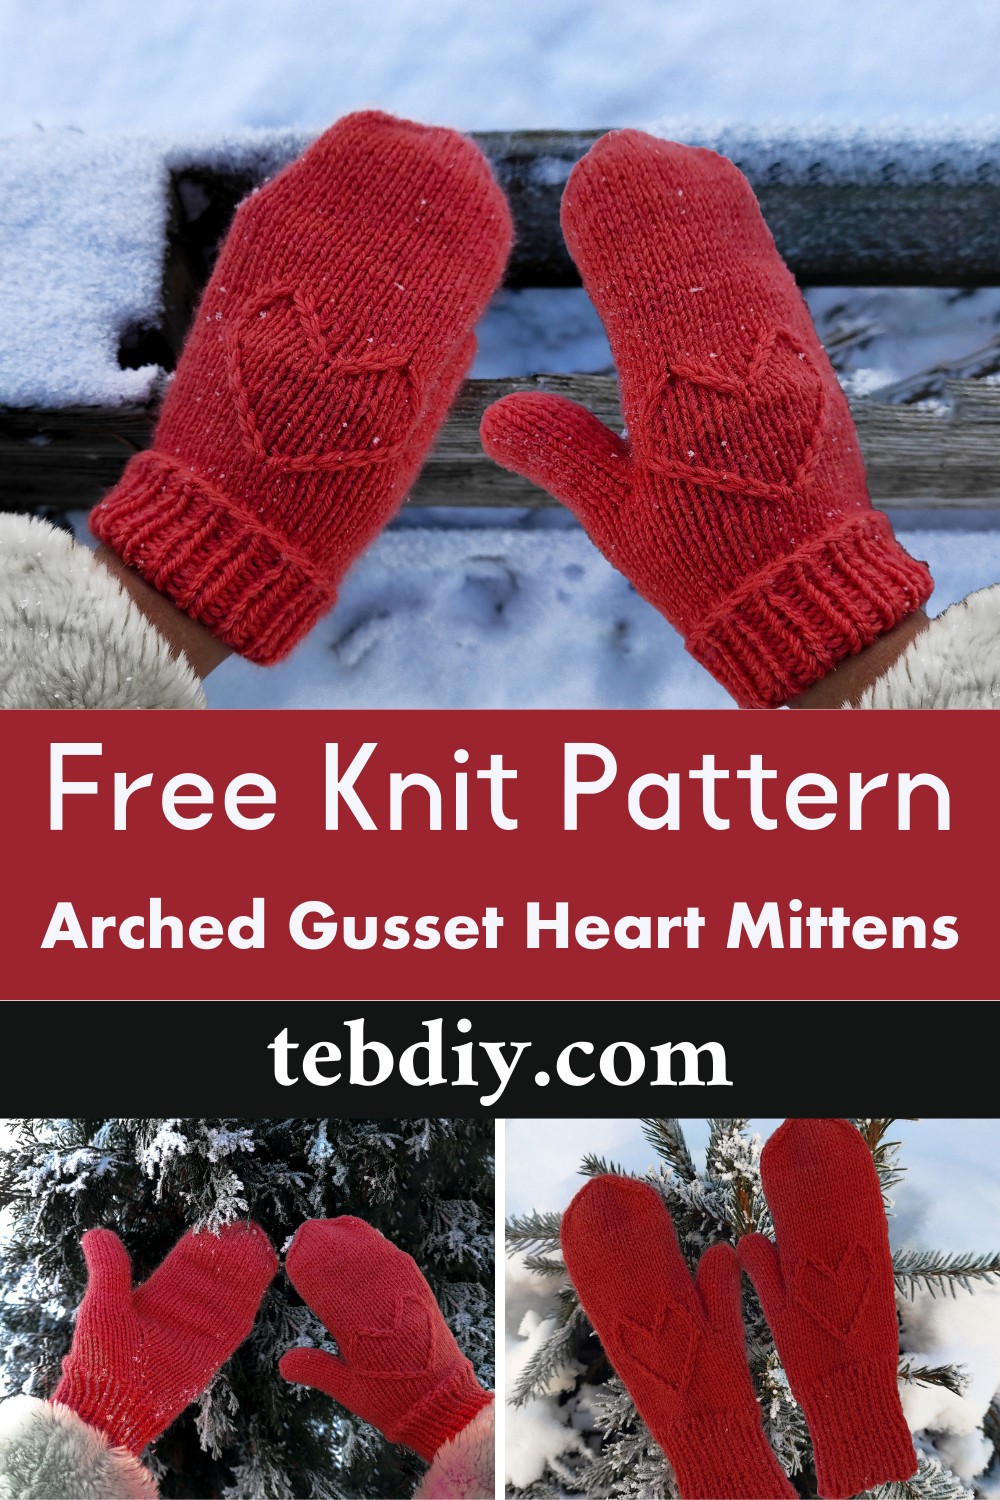 Arched Gusset Heart Mittens